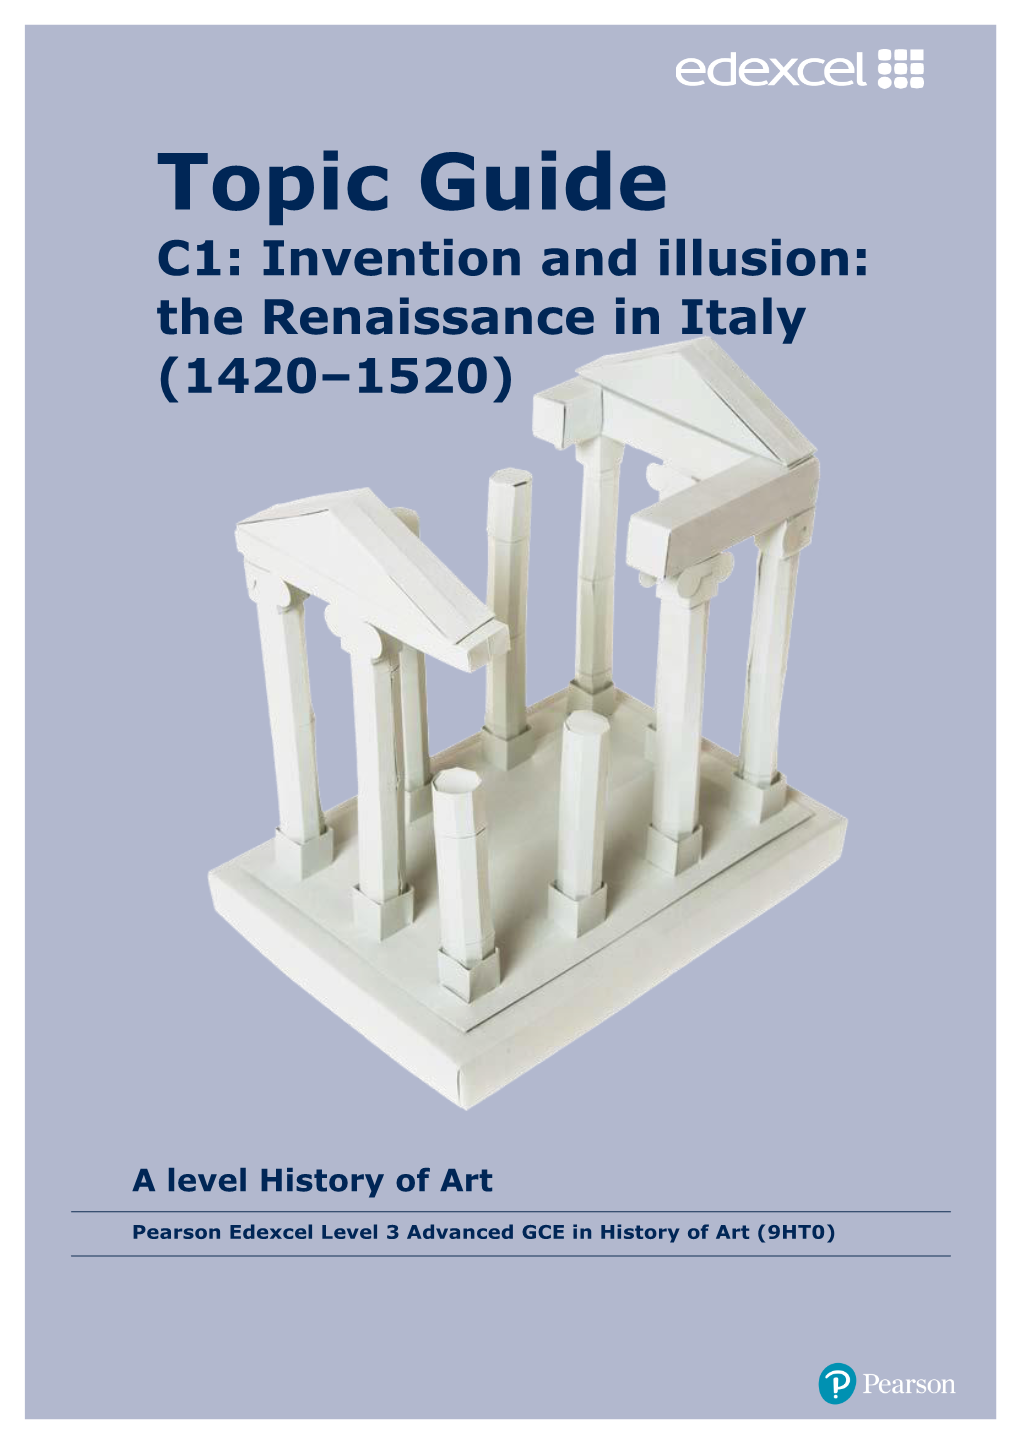 Topic Guide C1: Invention and Illusion: the Renaissance in Italy (1420–1520)